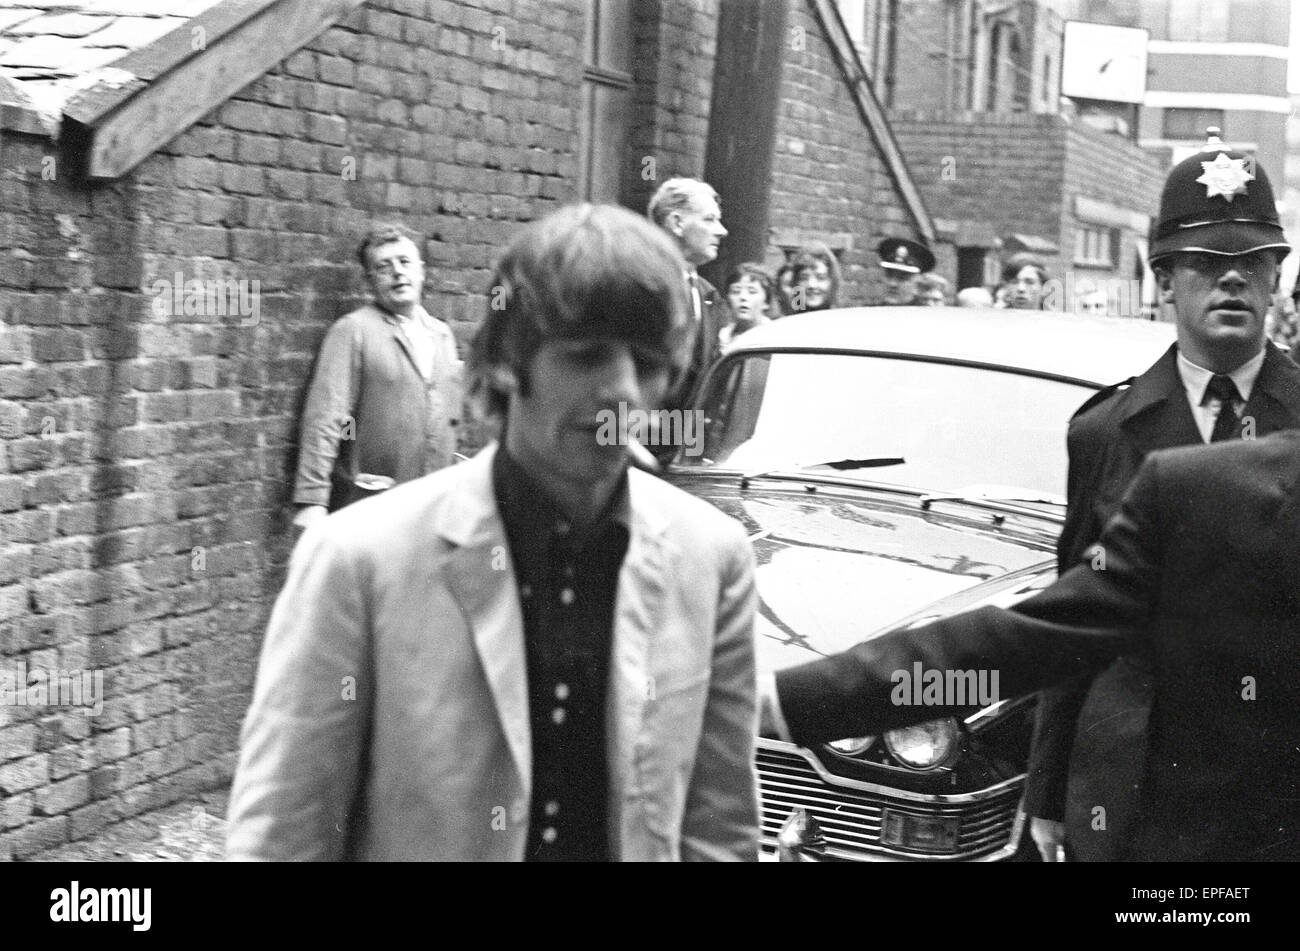 Premier of 'A Hard Day's Night', crowds gather to catch sight of The Beatles before the Northern premier starts in Liverpool. Ringo Starr pictured here smoking a cigarette after leaving the car. 10th July 1964. Stock Photo